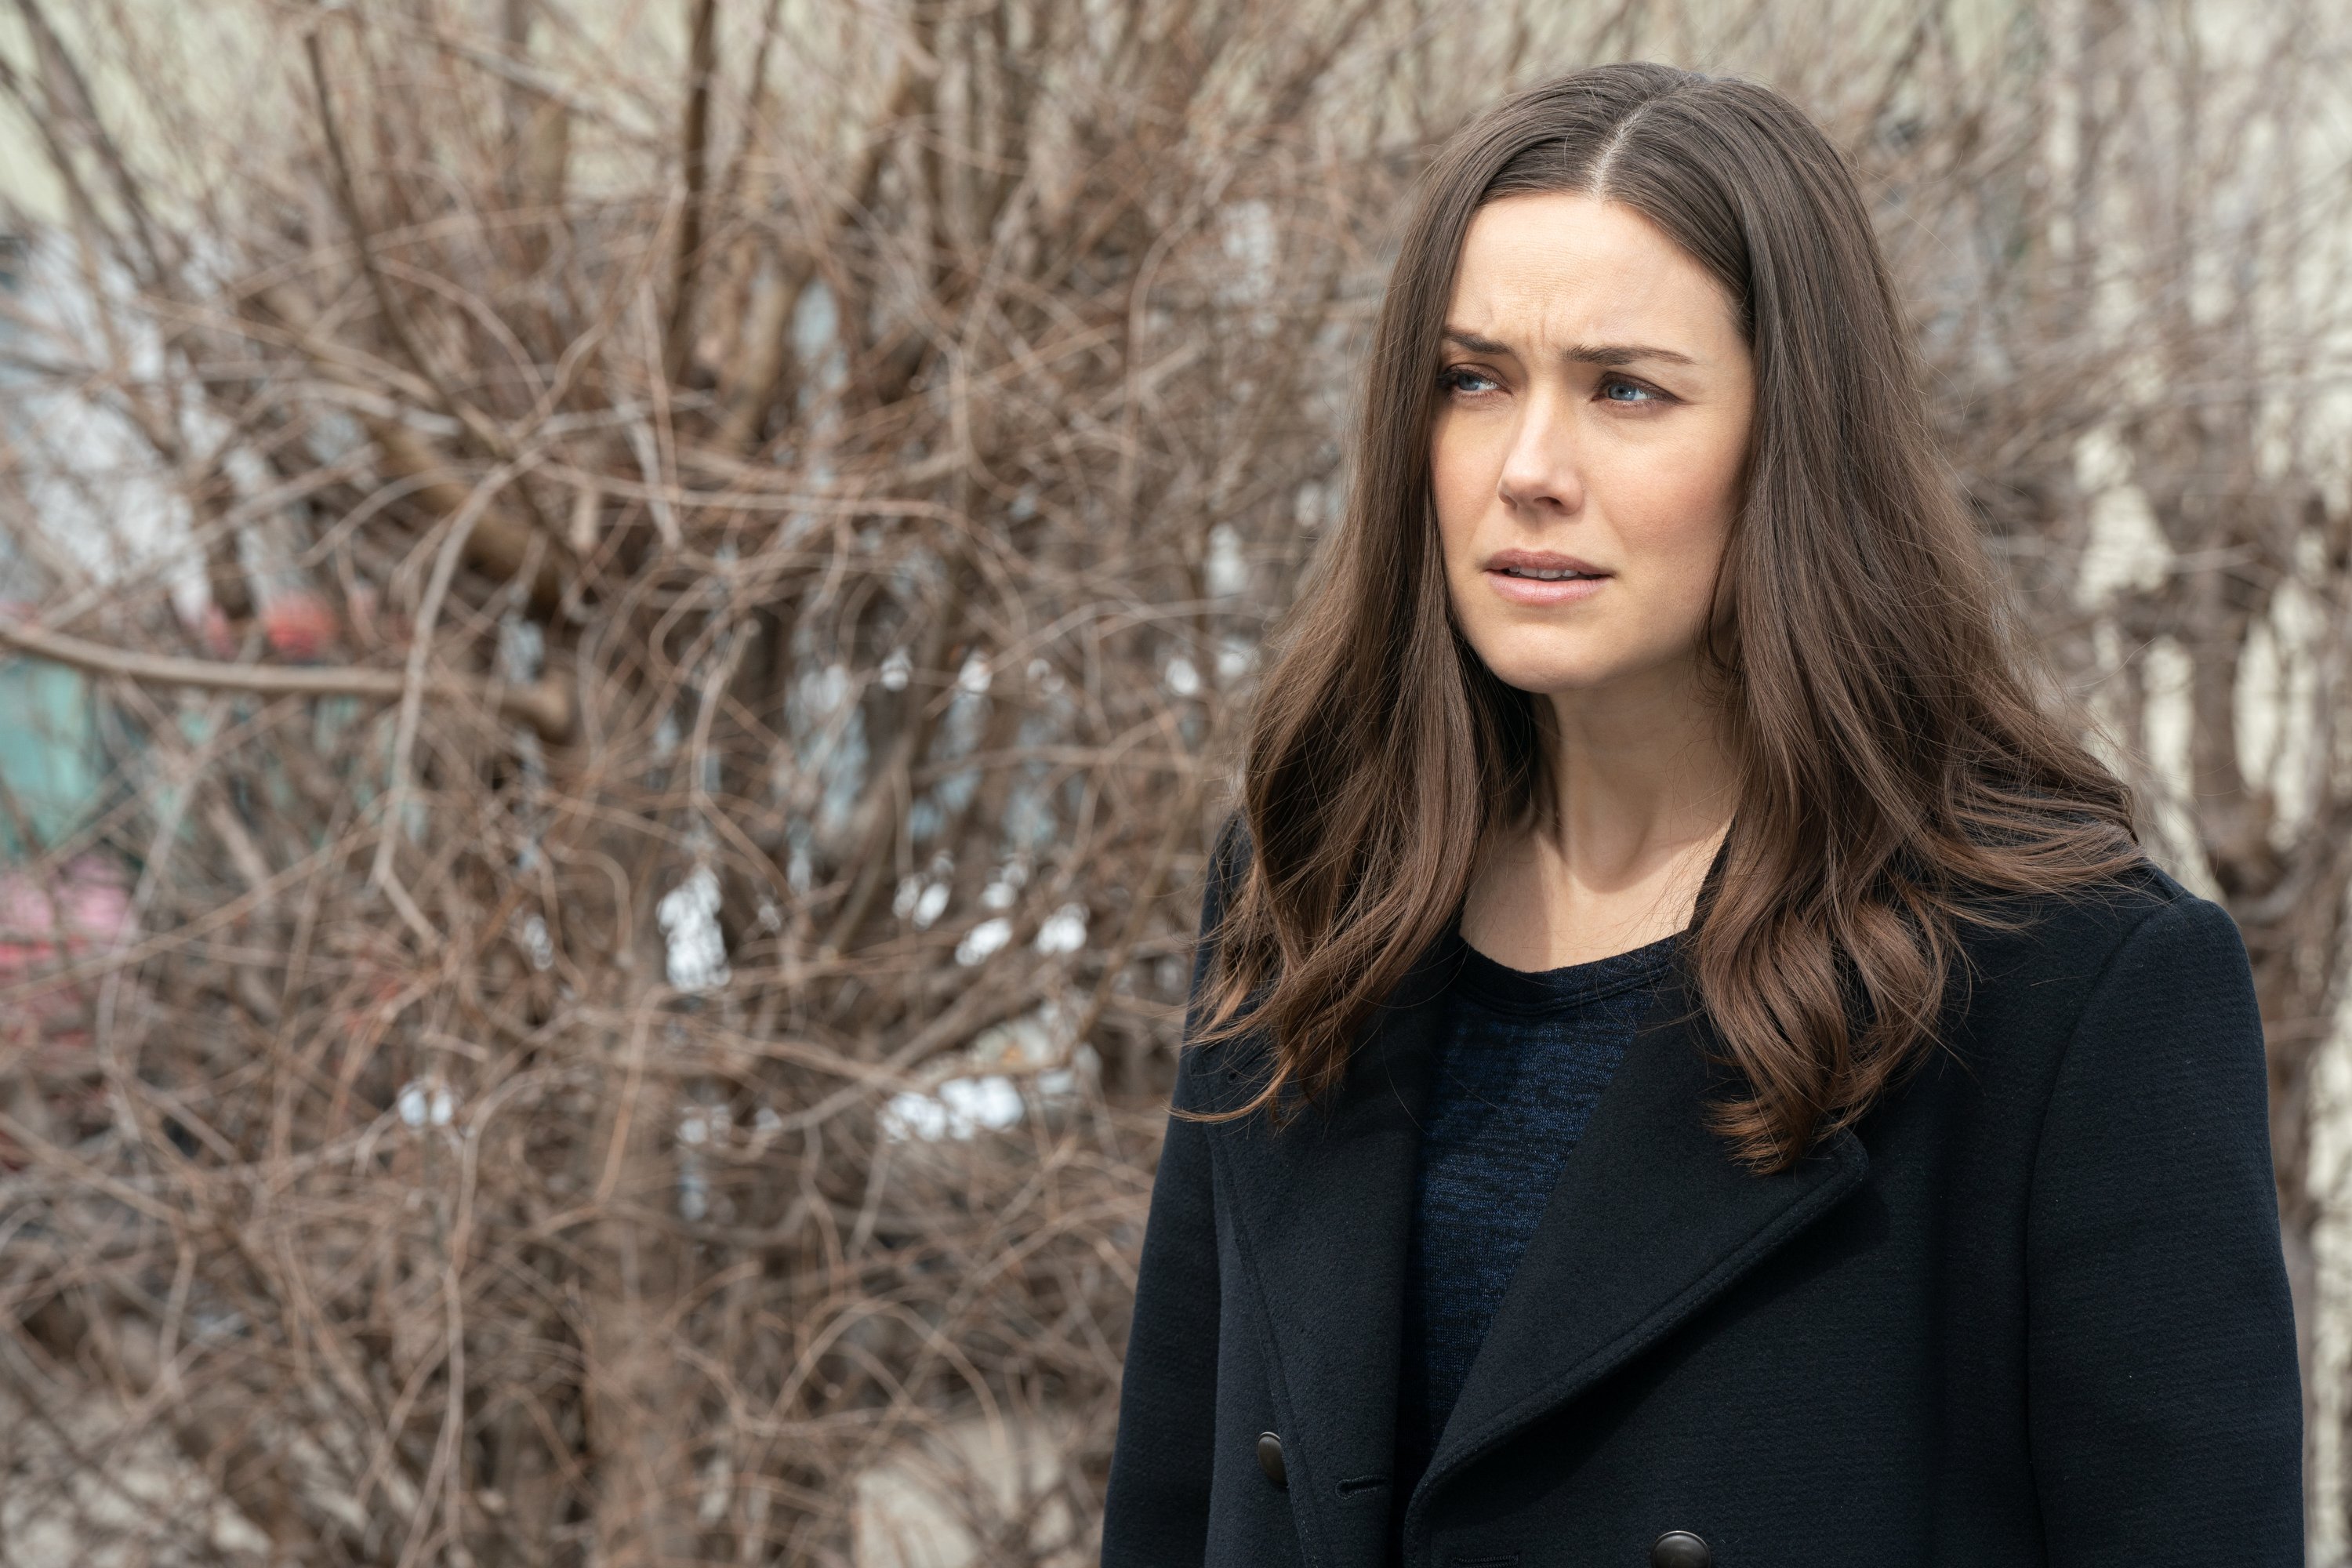 Megan Boone as Elizabeth Keen on the set of "BlackList' at an undiclosed location | Source: Getty Images